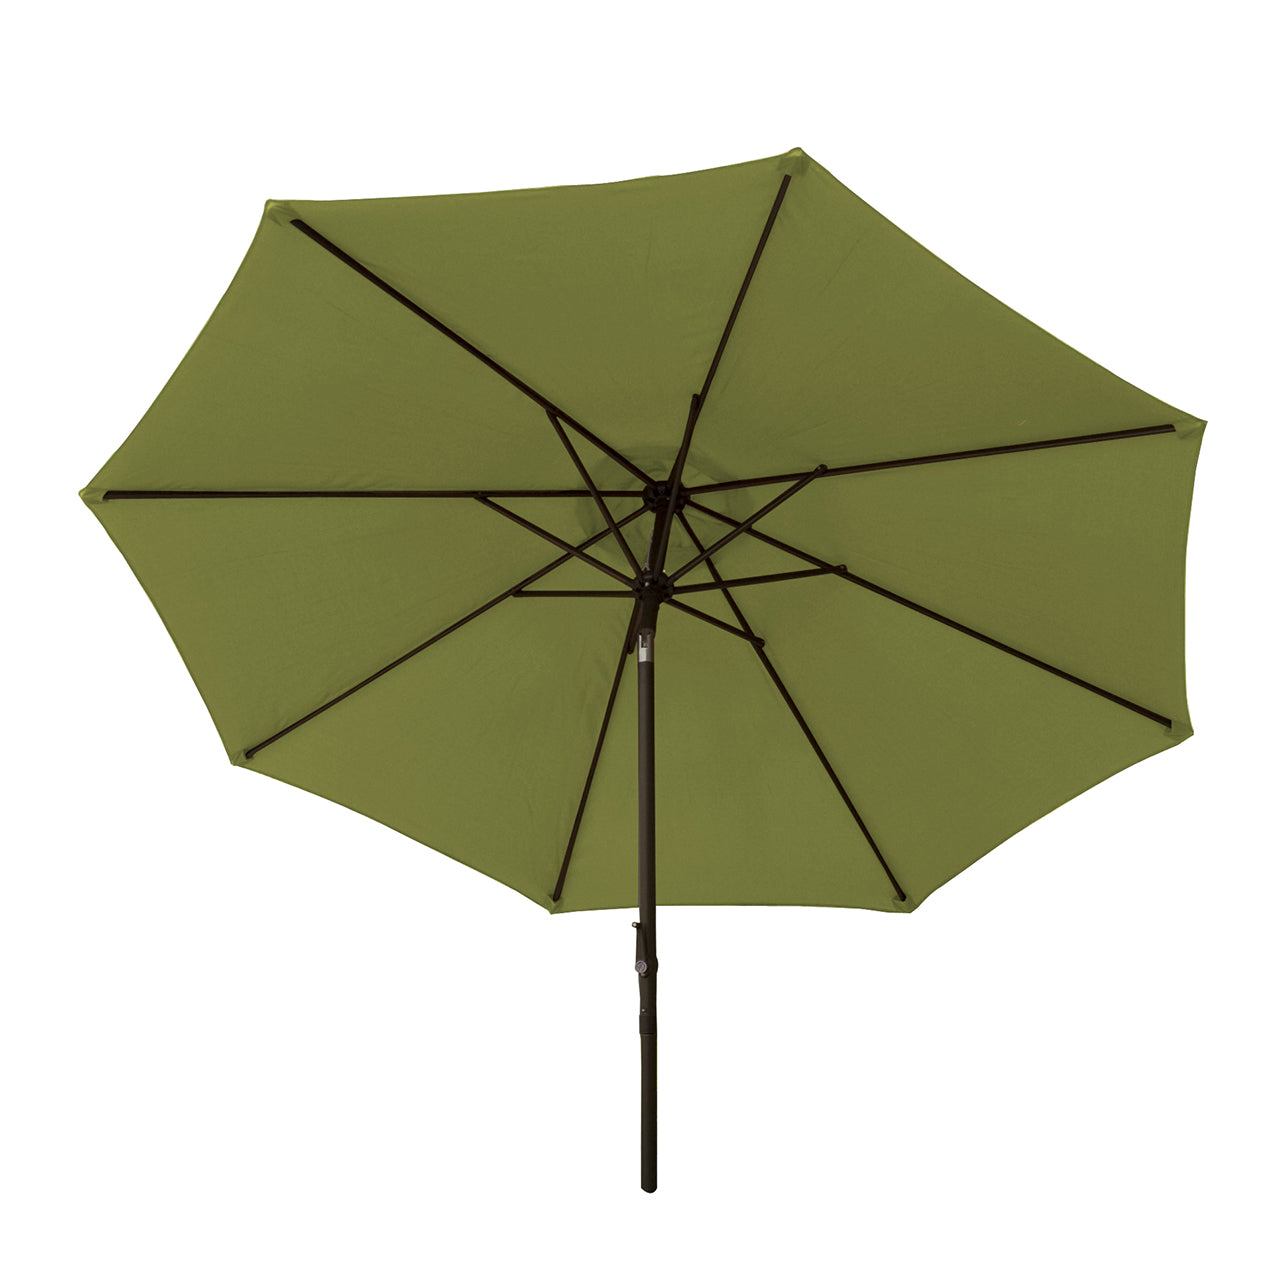 Bliss Outdoors 9-foot Patio Umbrella with Aluminum Pole in the green variation.